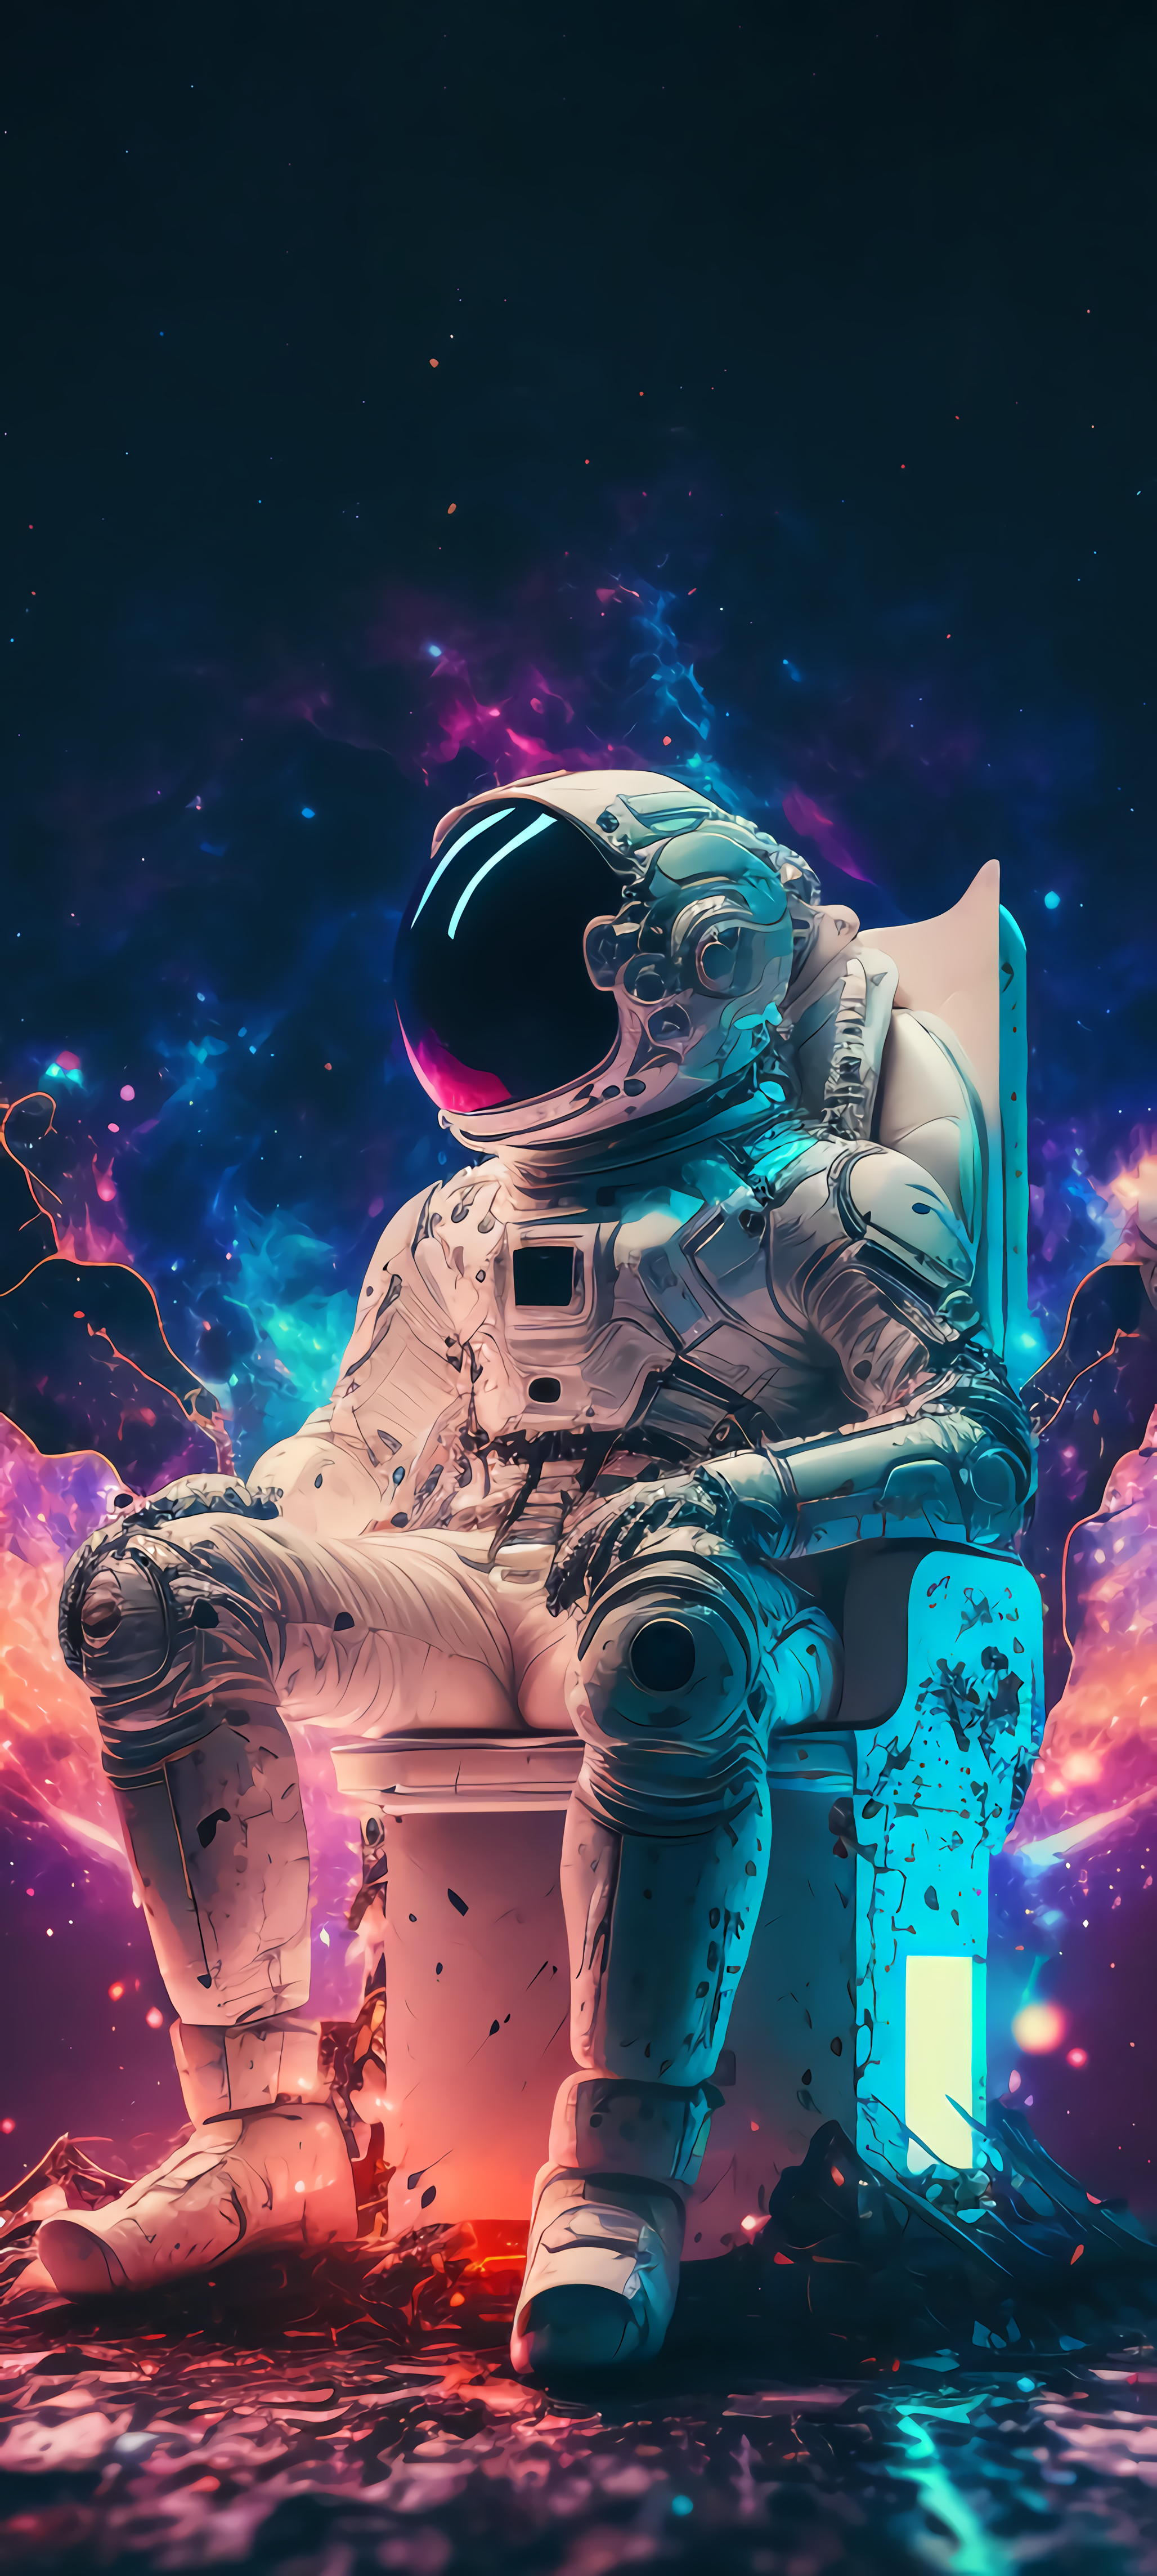 Astronaunt in the space HD wallpaper download